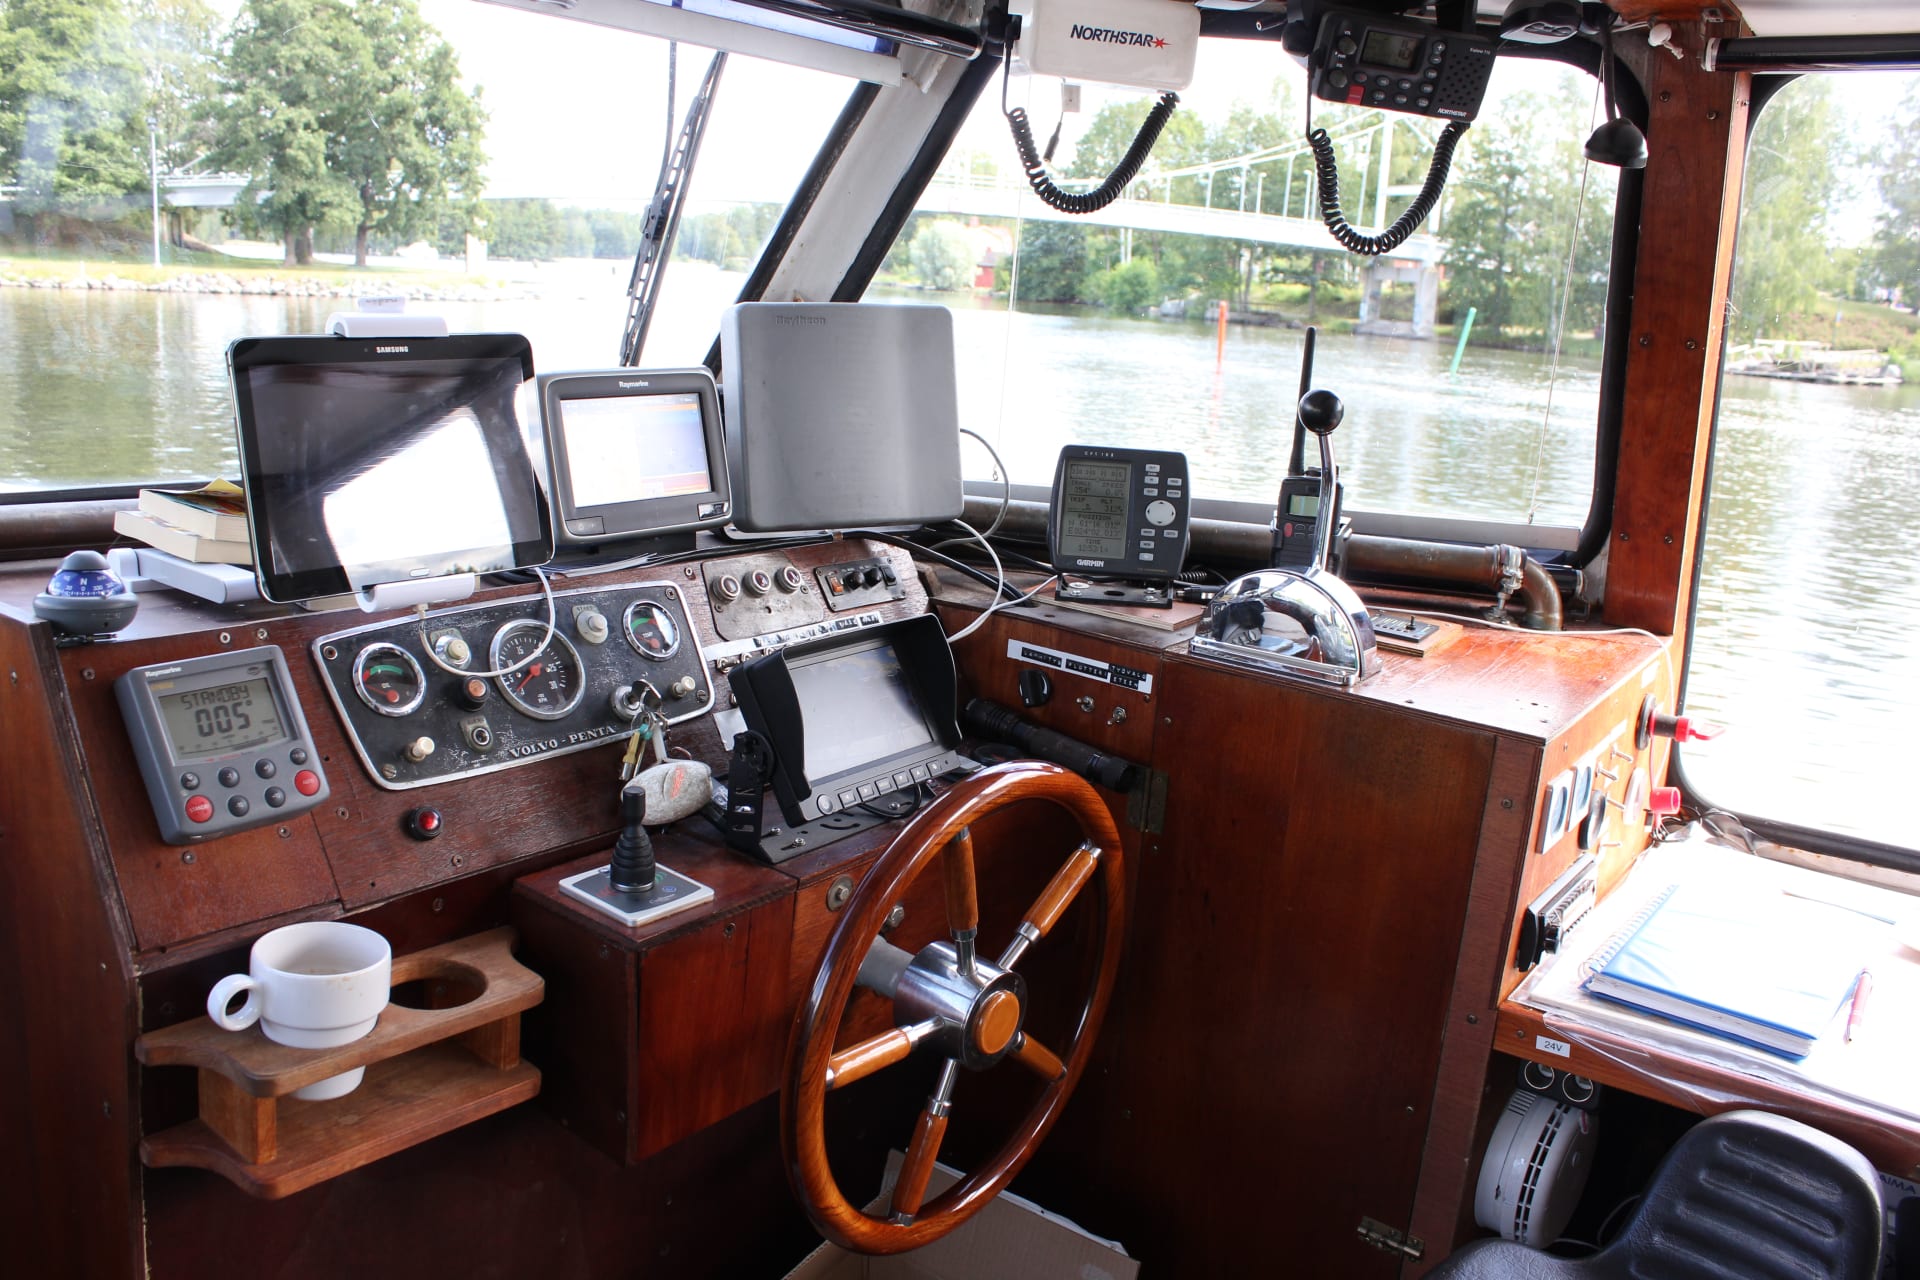 Cabin of the boat from inside